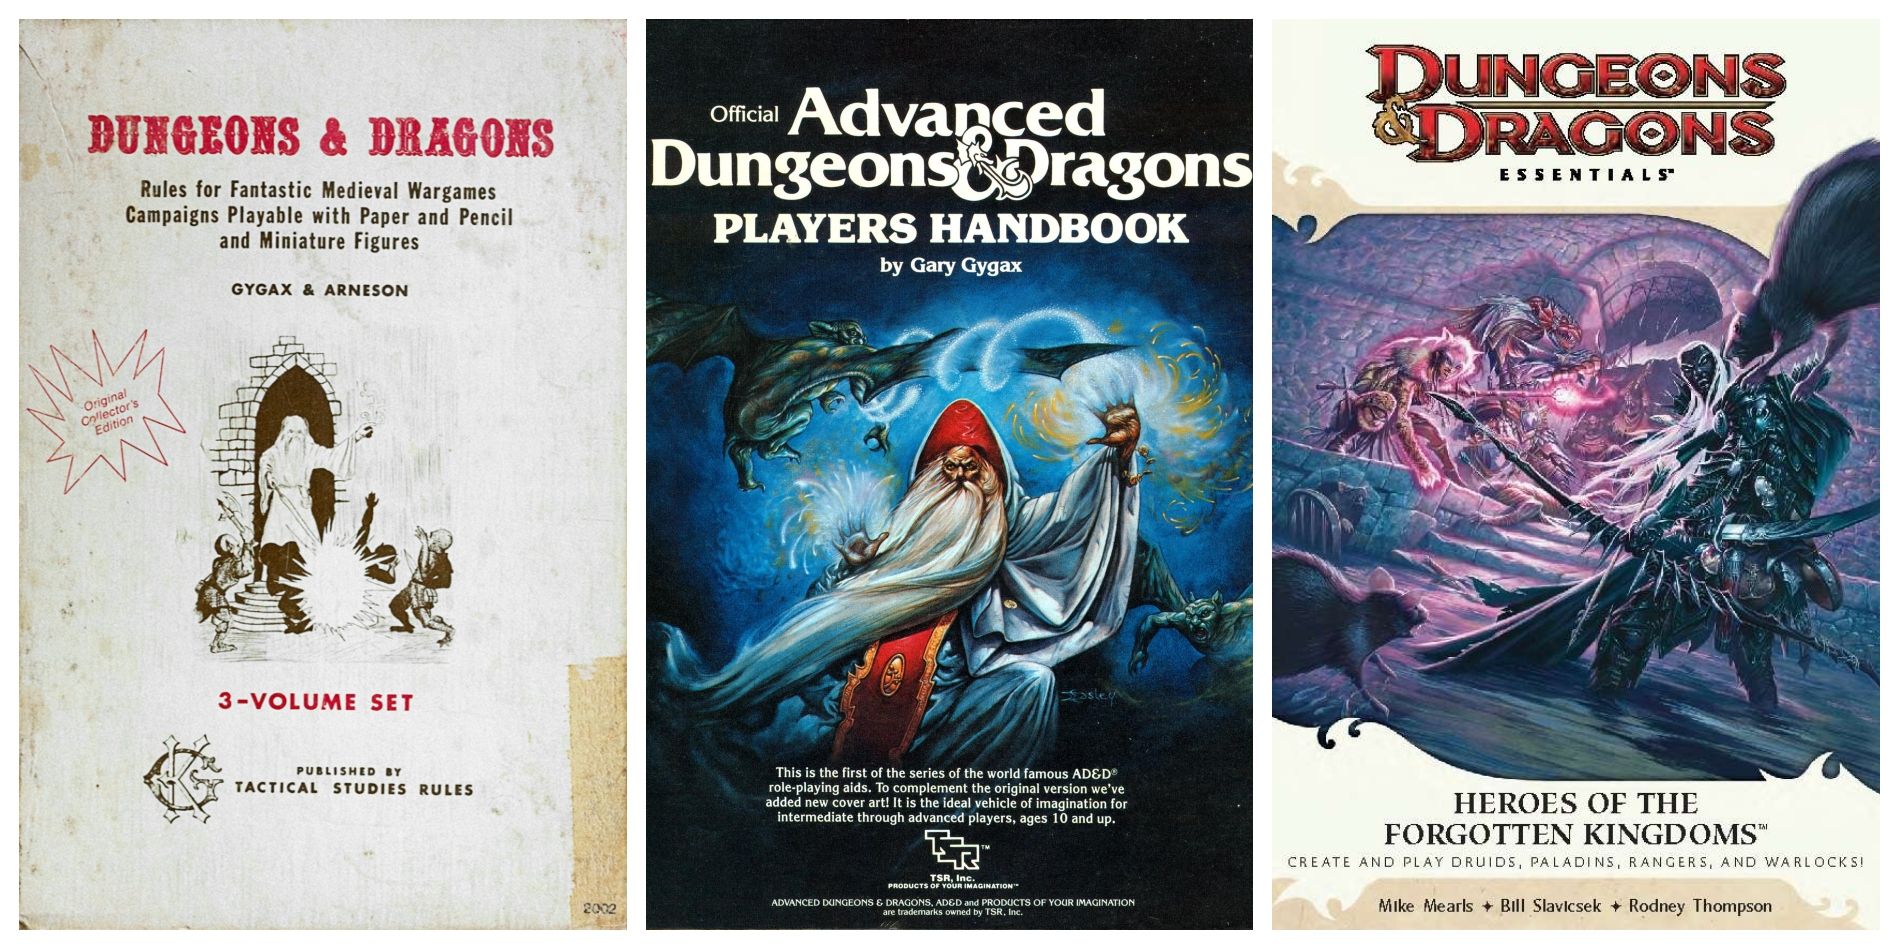 Every Dungeons & Dragons Edition (And How They're Different)